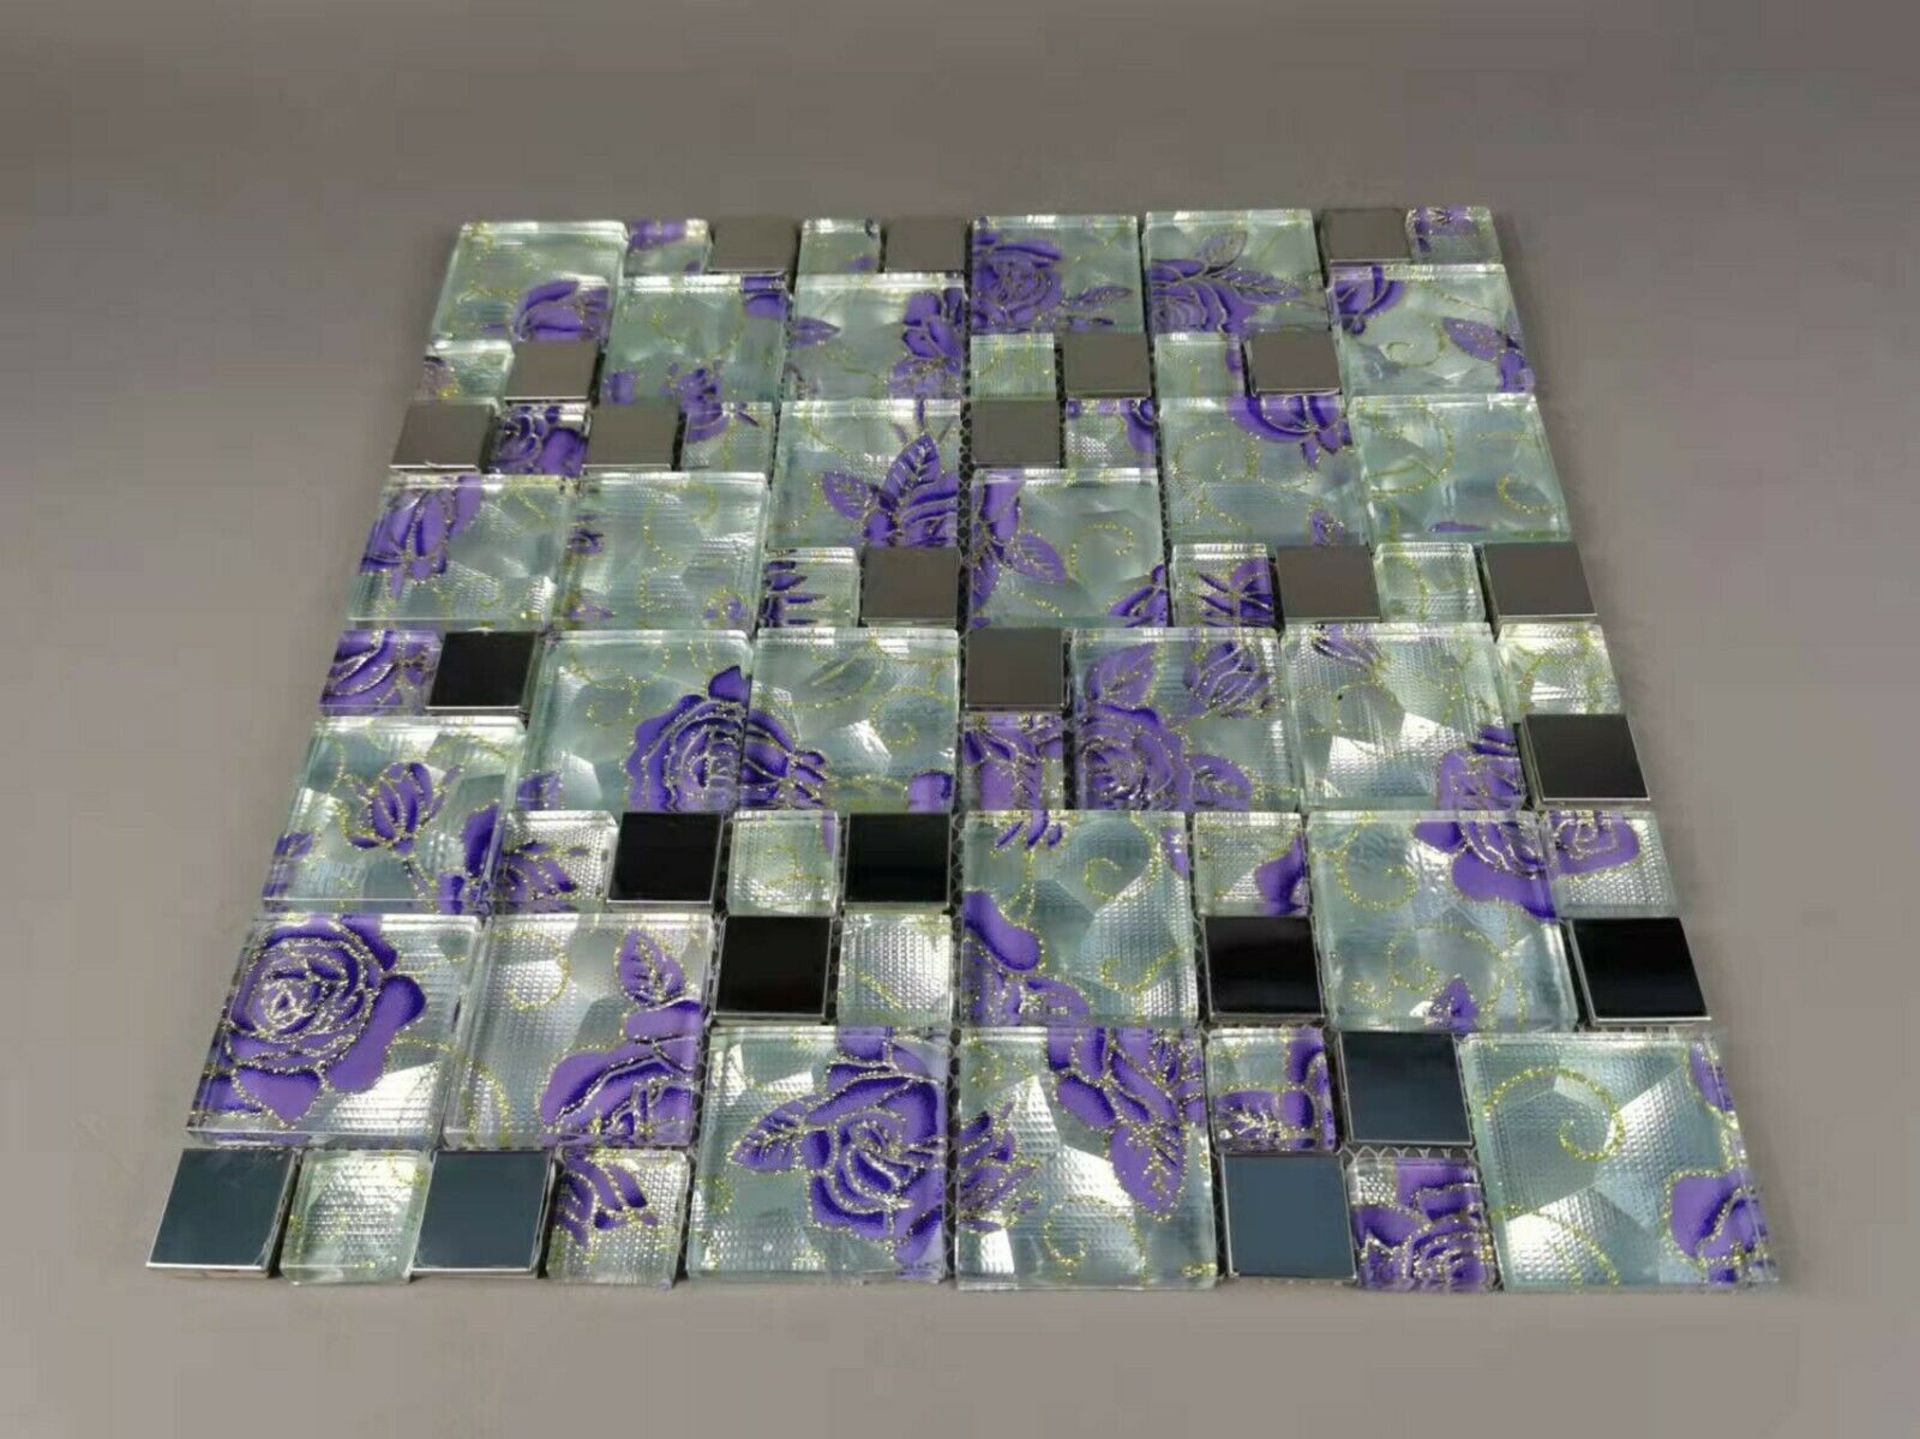 5 Square Metres - High Quality Glass/Stainless Steel Mosaic Tiles - Image 3 of 3